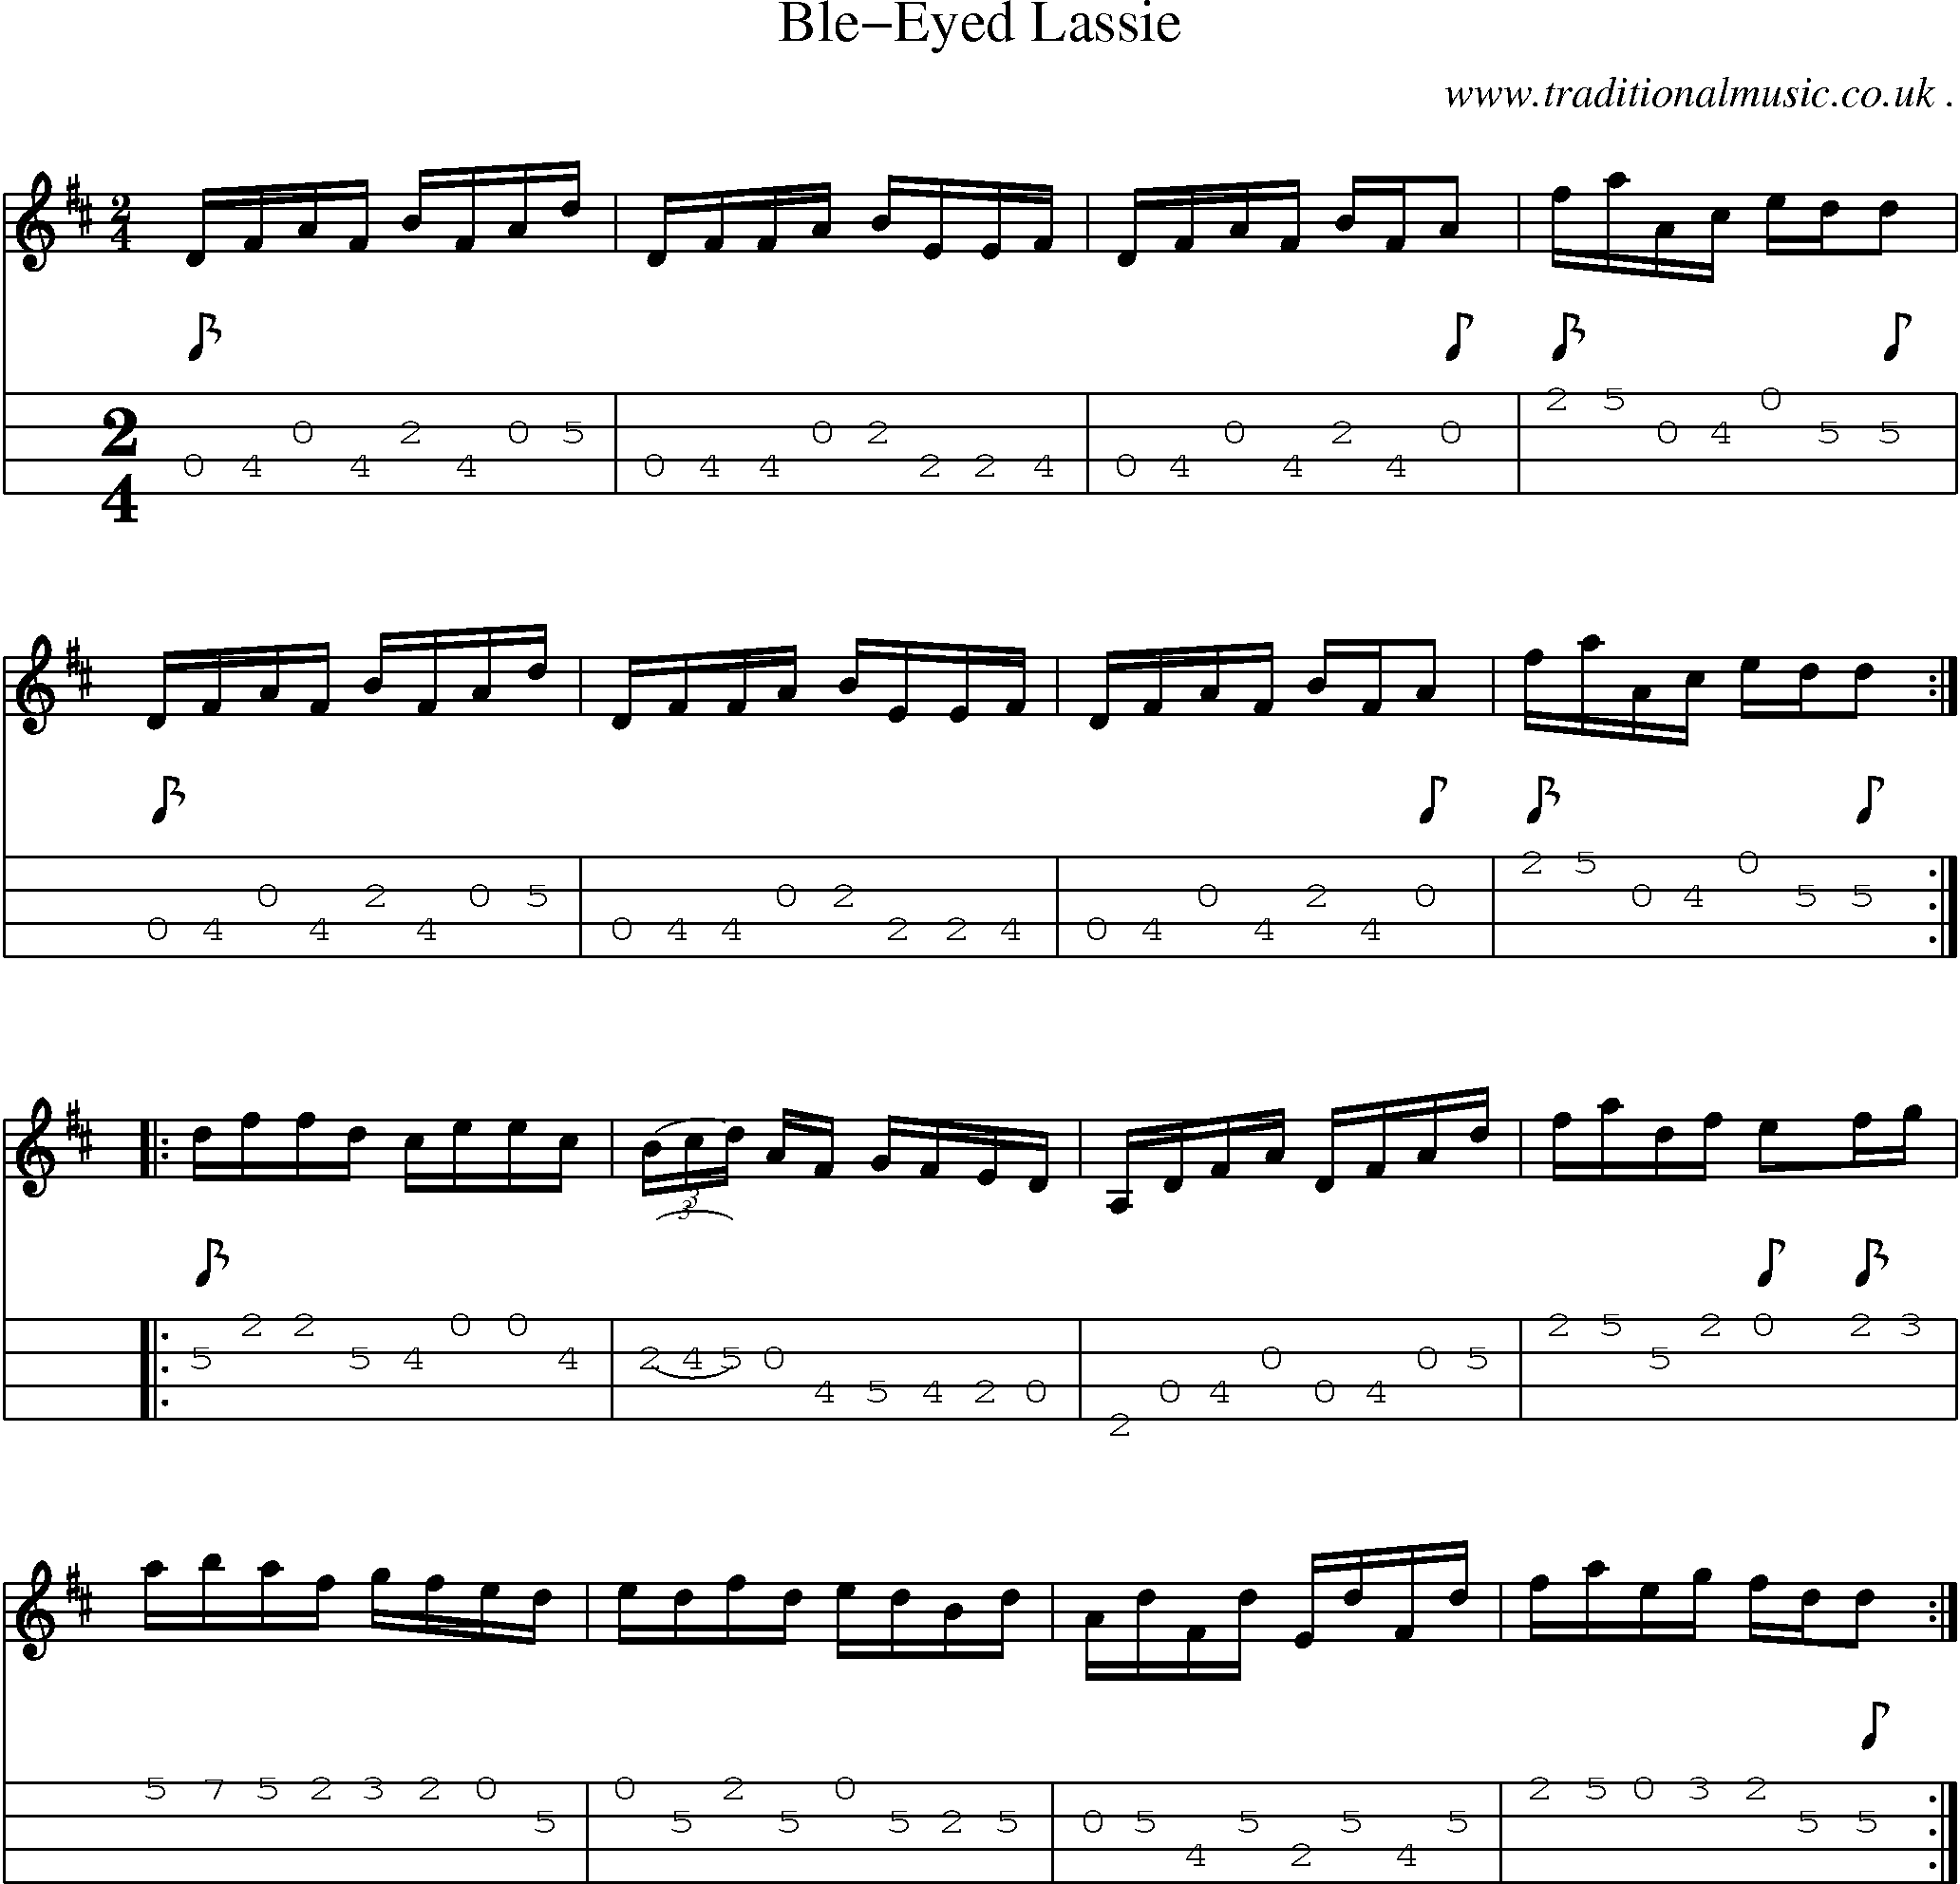 Sheet-Music and Mandolin Tabs for Ble-eyed Lassie